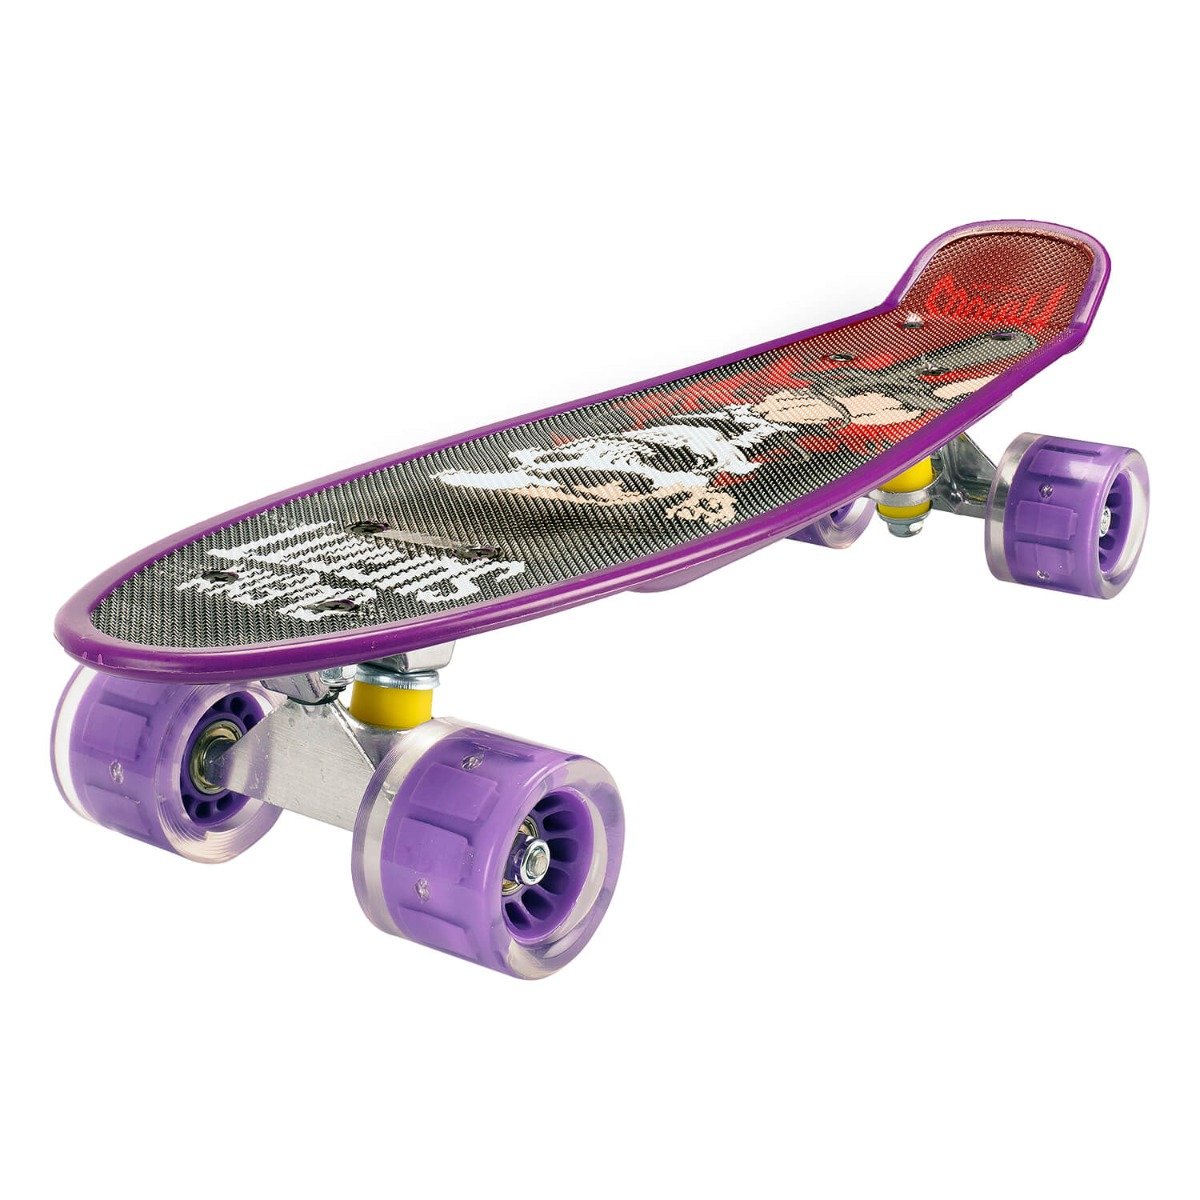 Penny board Action One, Cu roti luminoase, 22 cm, ABEC-7 PU, Aluminium Truck 90 kg, Redemption Action One